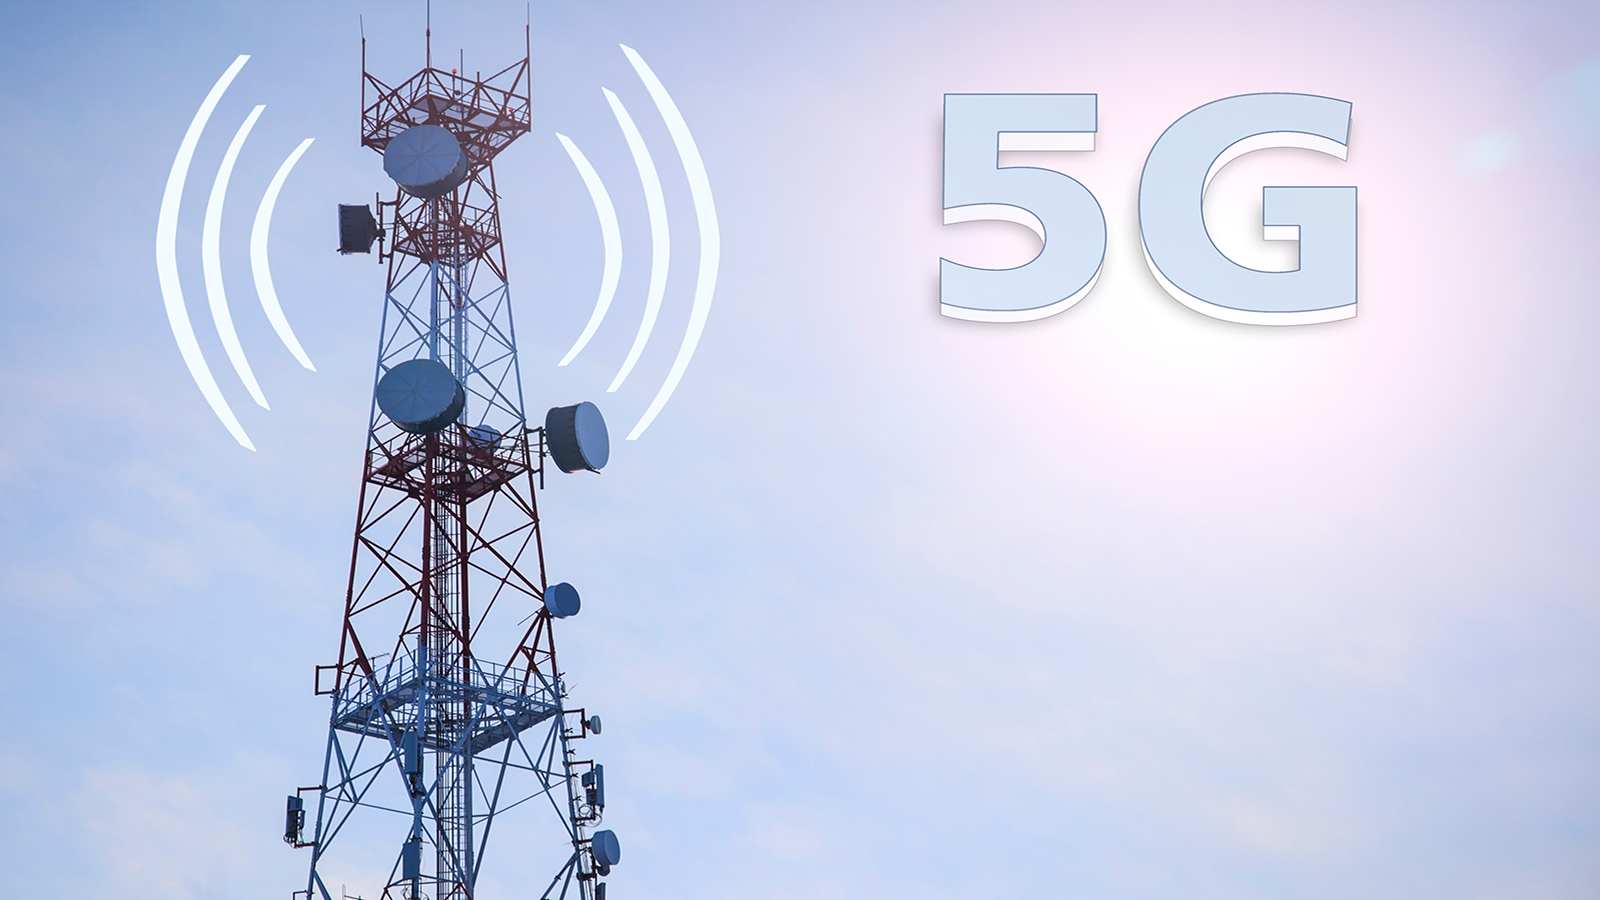 Burntwood, Lichfield, and Aldridge Embrace the Future with 5G Connectivity